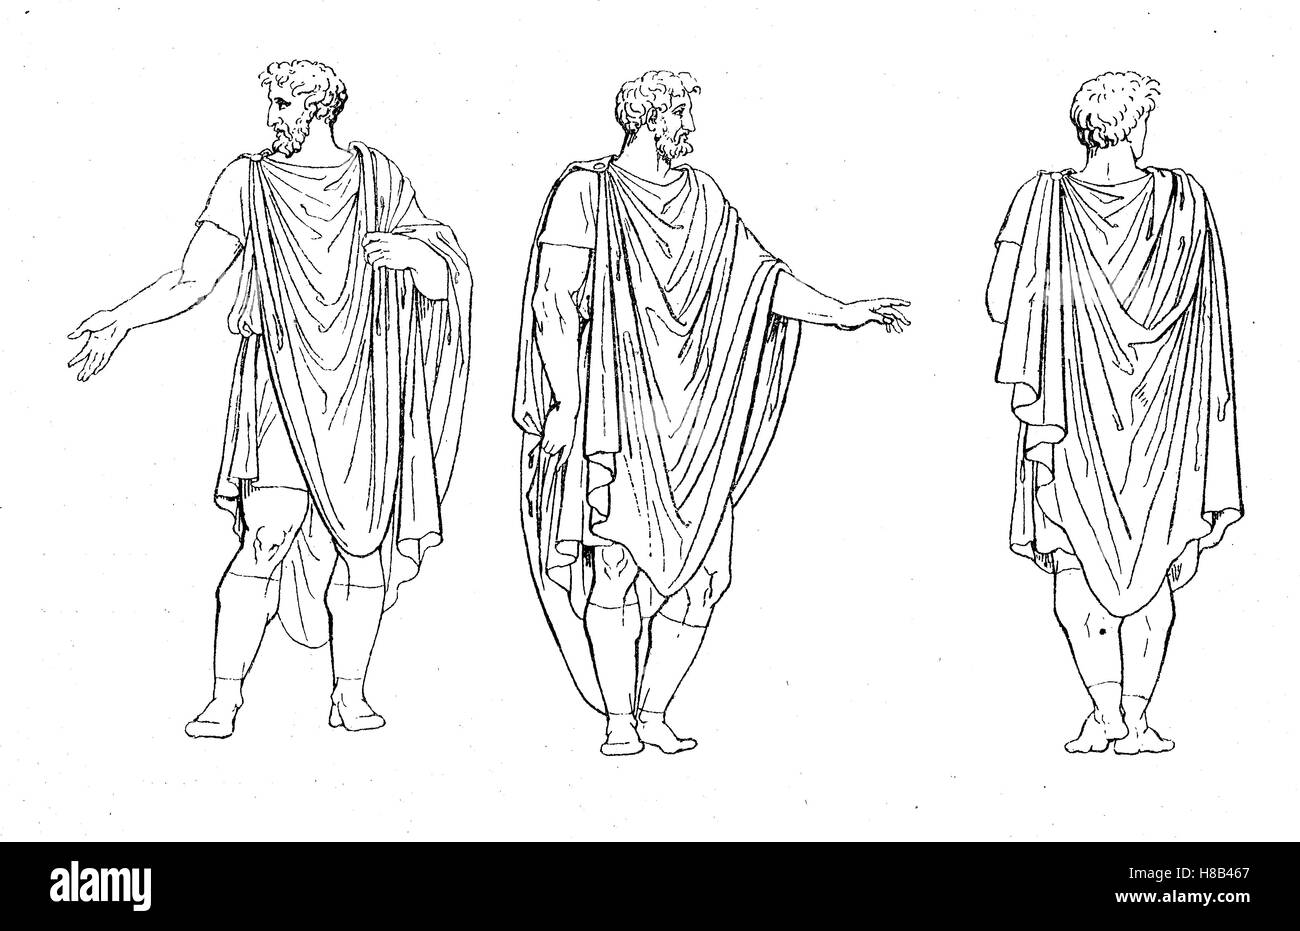 Rome, Tribunes with Tunica and Lacerna coat, History of fashion, costume story Stock Photo